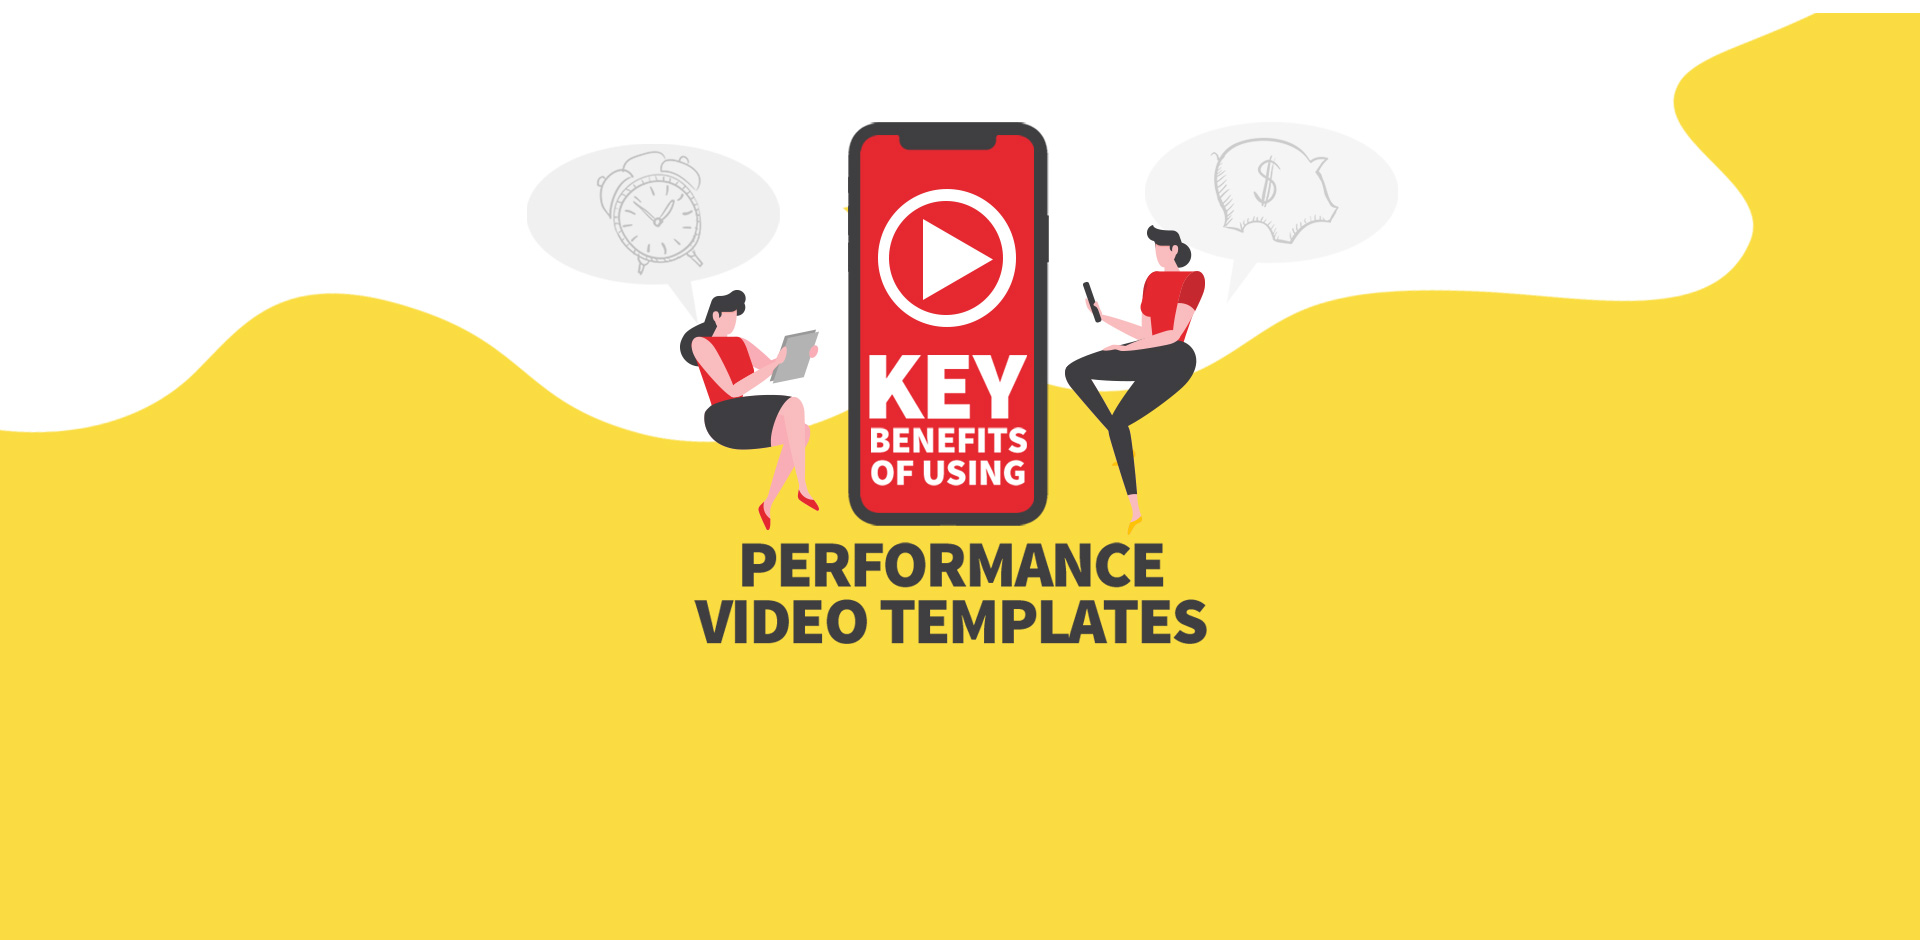 4 Key Benefits of Using Performance Video Templates